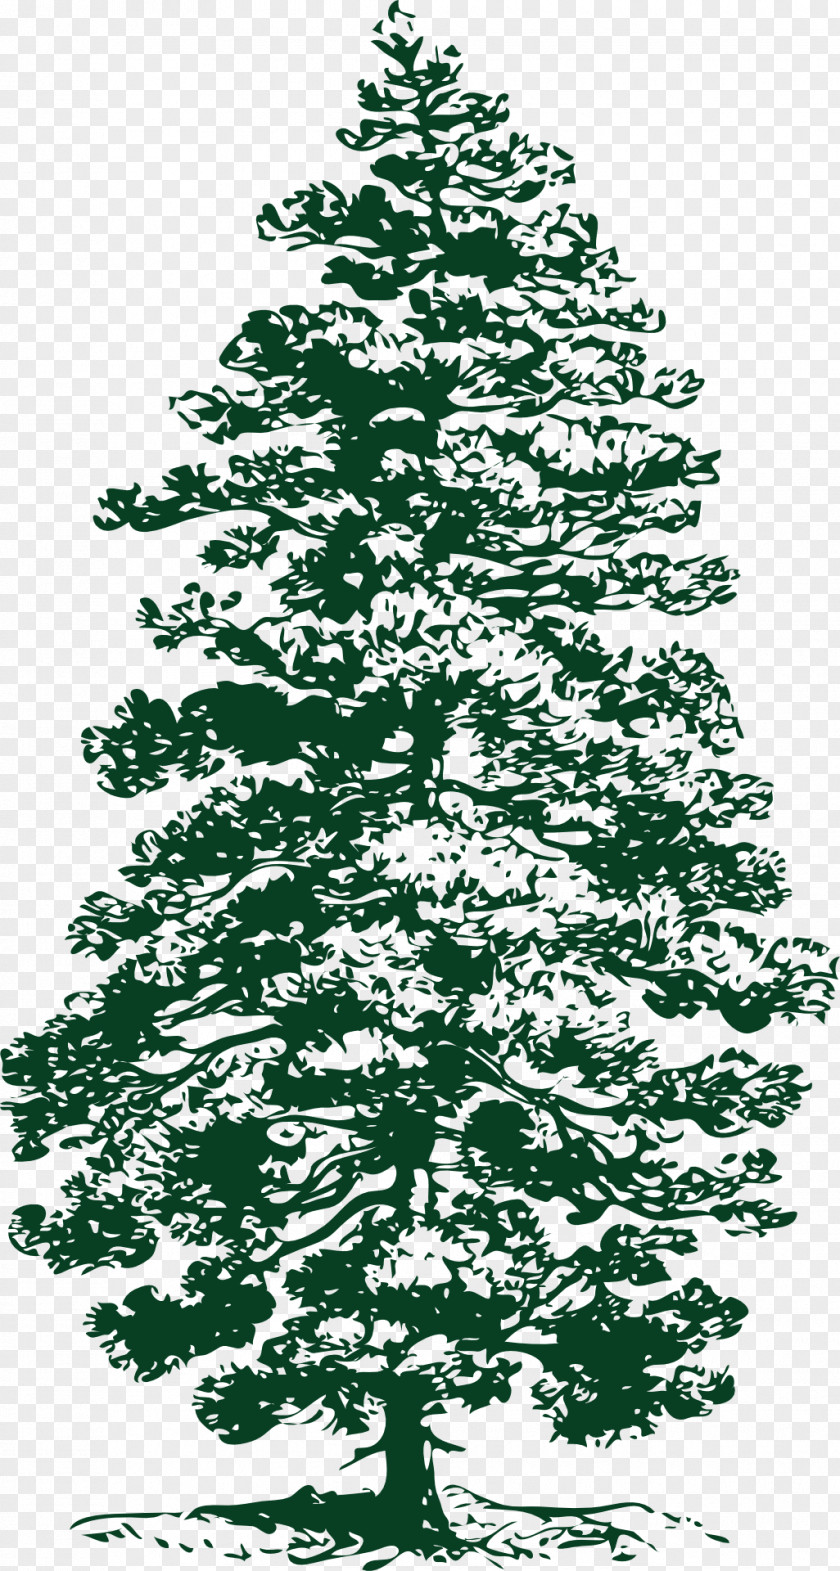 Pine Eastern White Tree Clip Art PNG